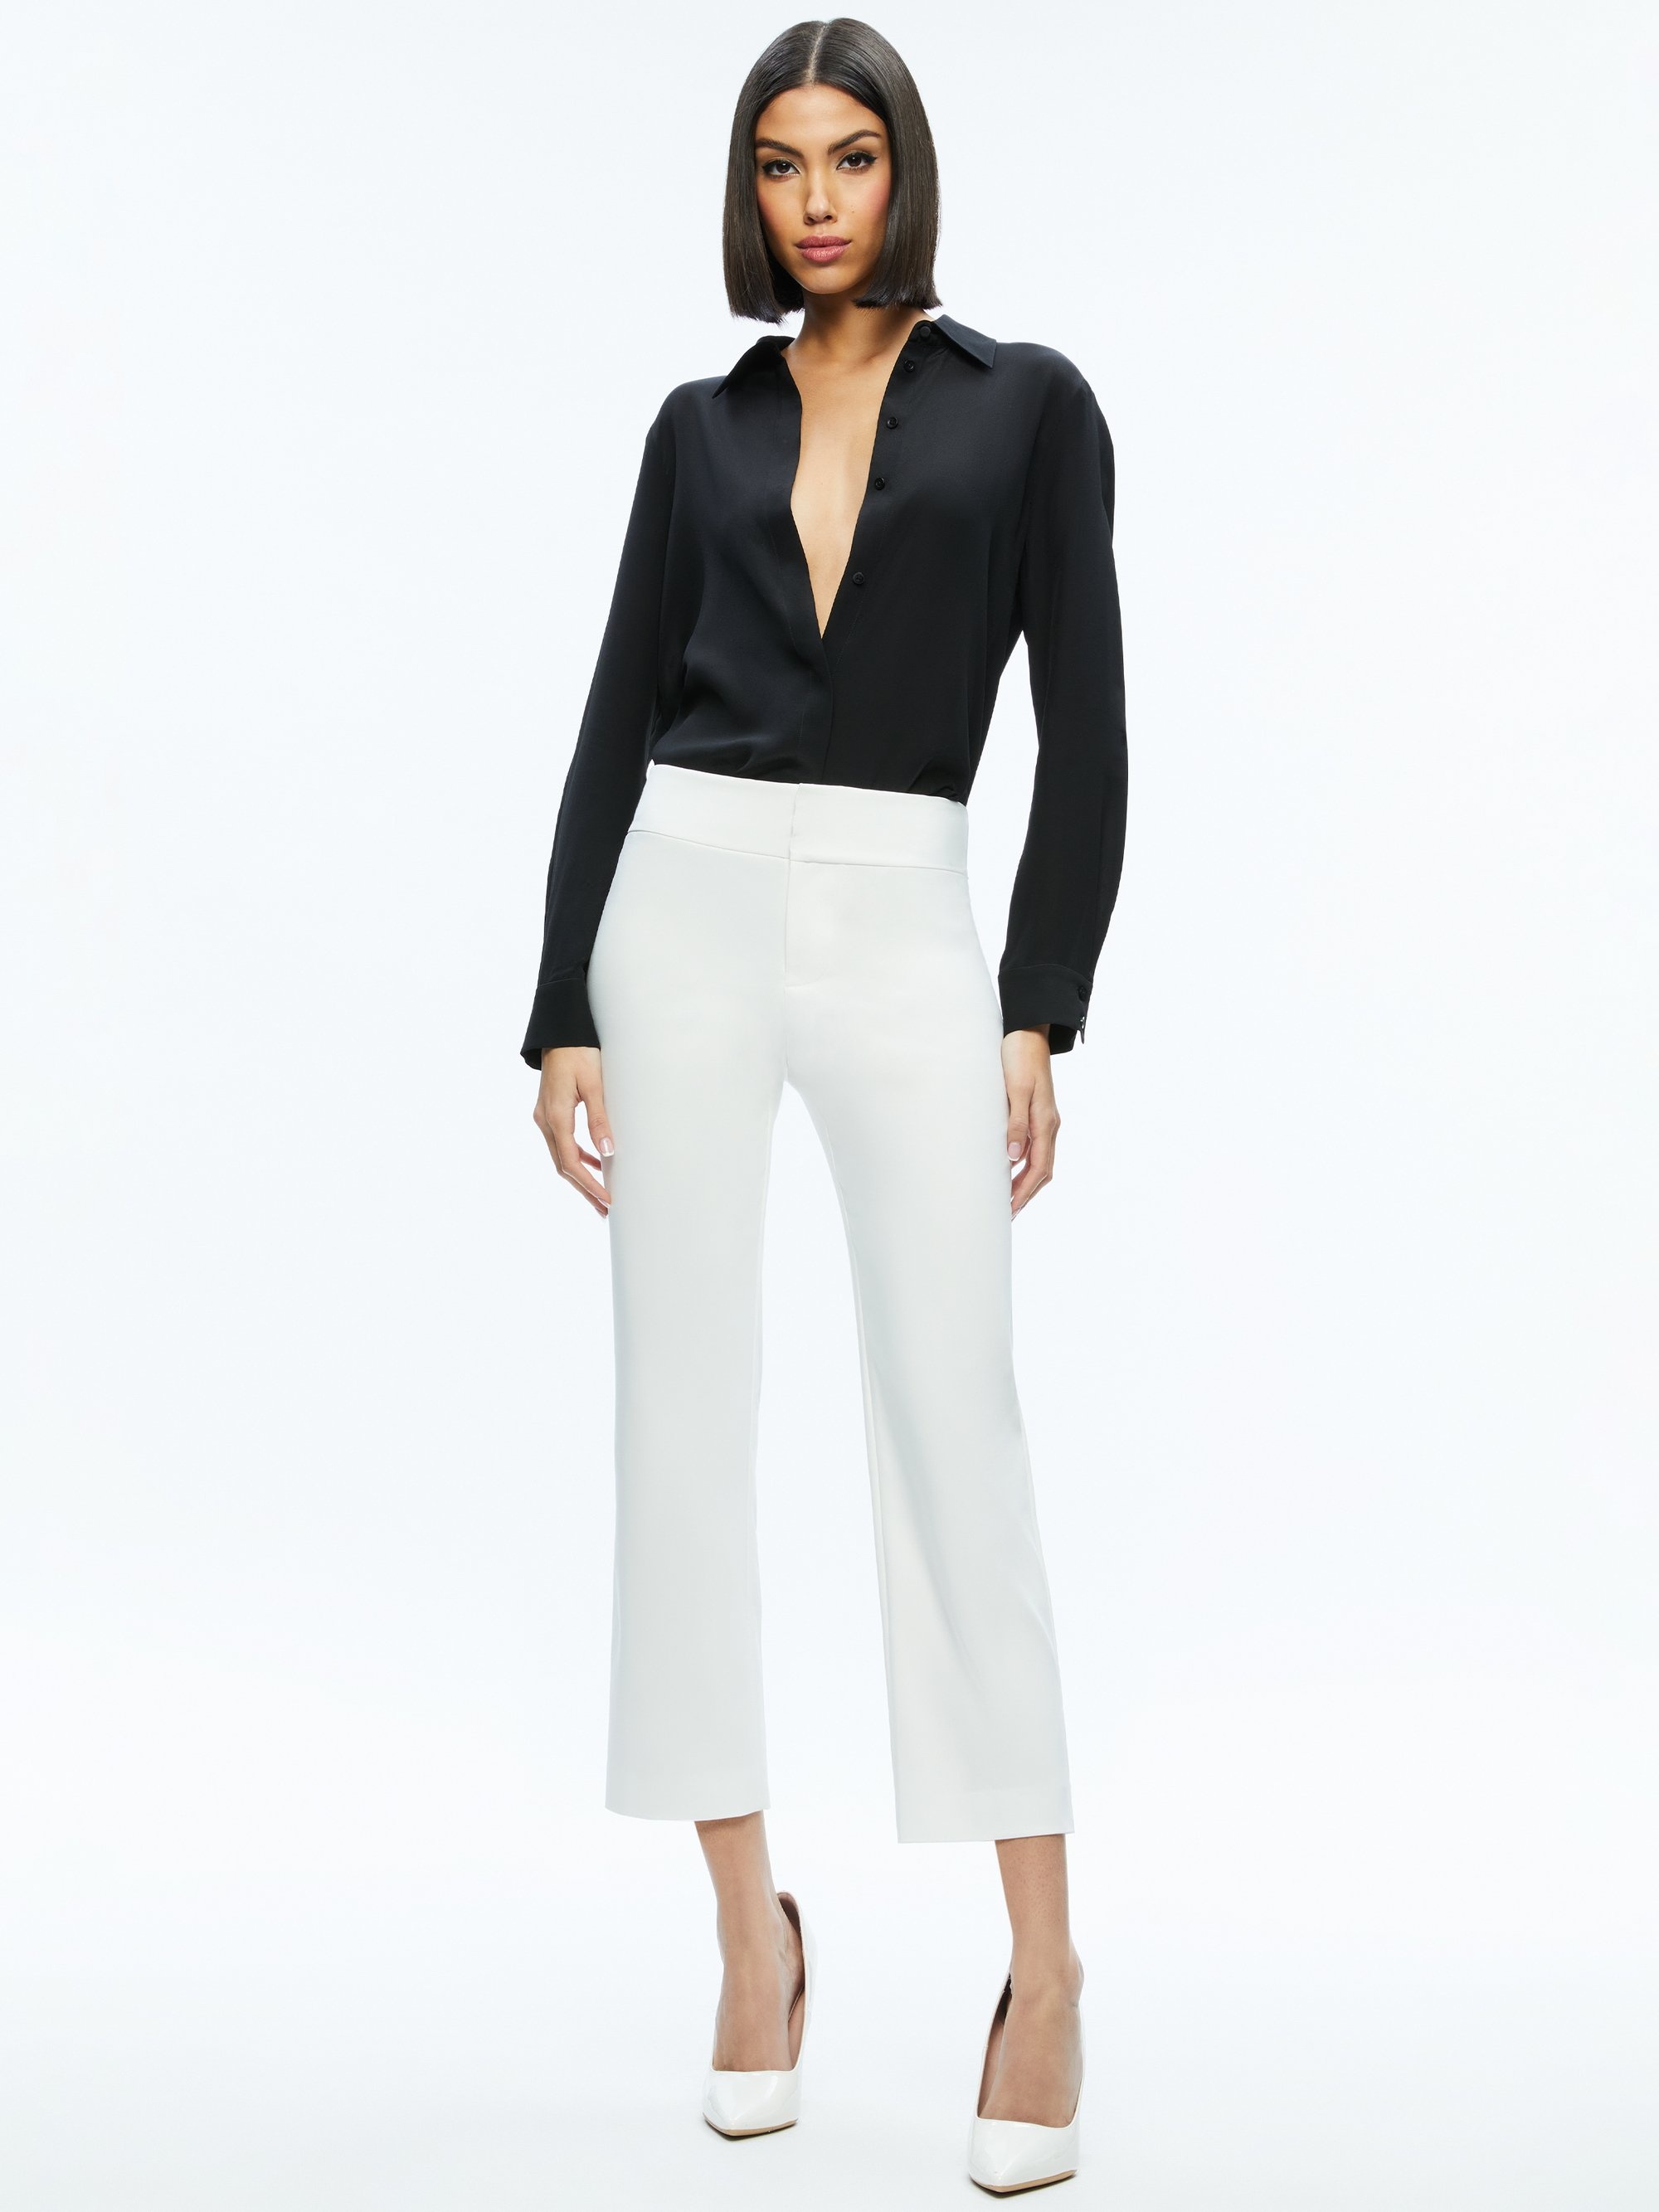 STACEY LOW RISE KICK FLARE PANT - 4